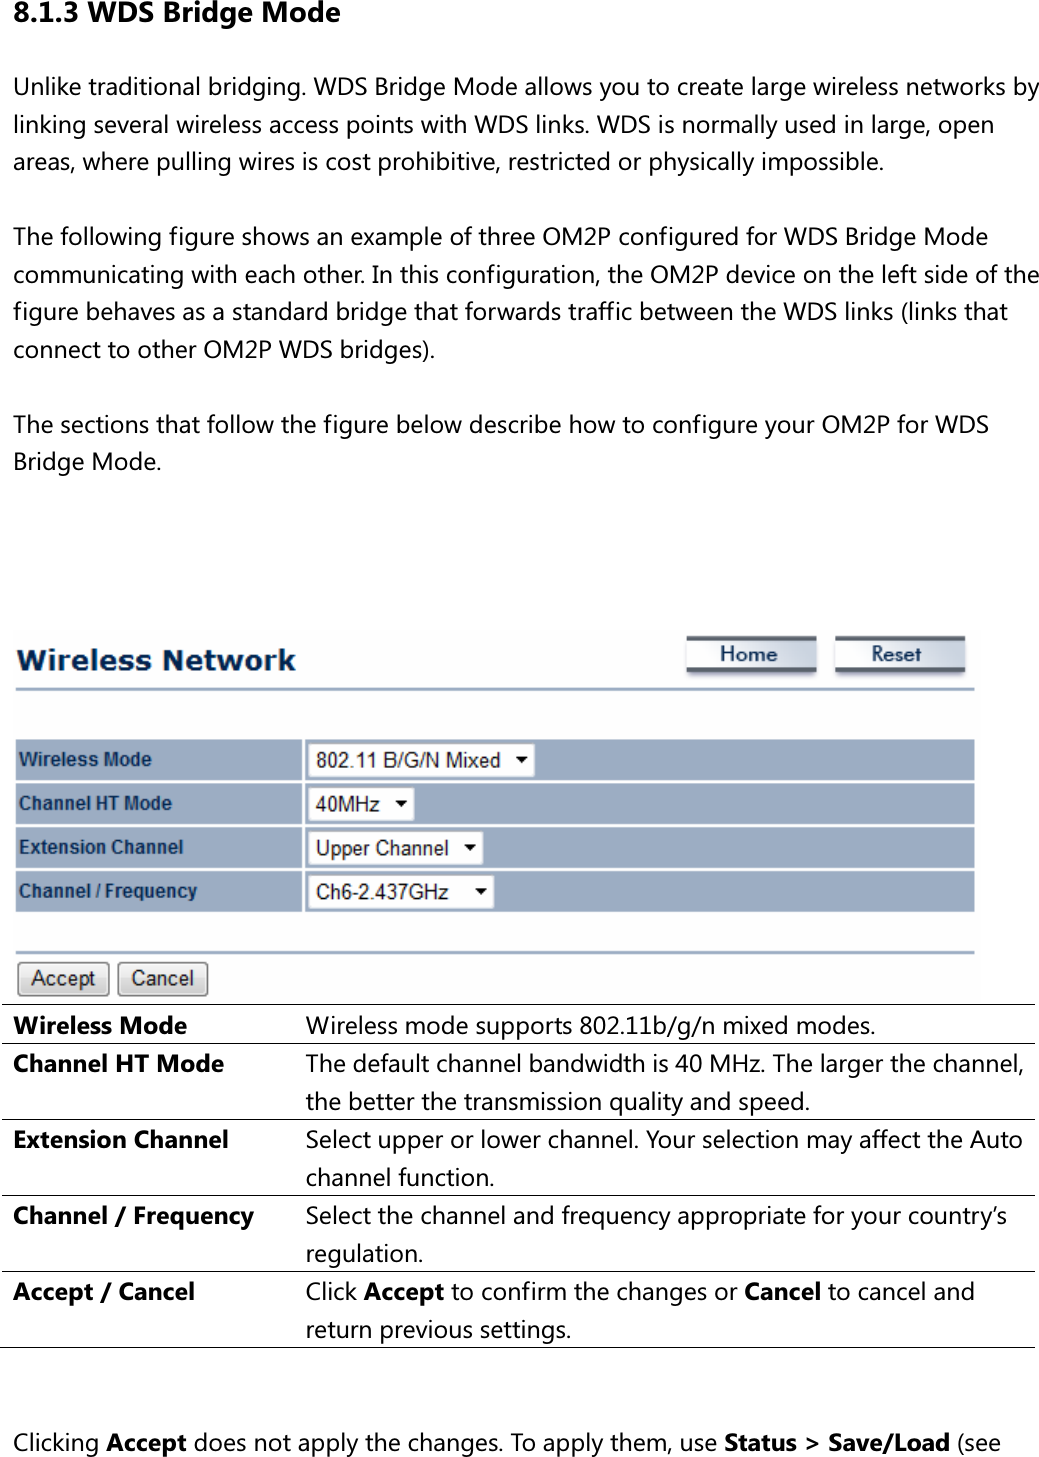 8.1.3 WDS Bridge Mode Unlike traditional bridging. WDS Bridge Mode allows you to create large wireless networks by linking several wireless access points with WDS links. WDS is normally used in large, open areas, where pulling wires is cost prohibitive, restricted or physically impossible.    The following figure shows an example of three OM2P configured for WDS Bridge Mode communicating with each other. In this configuration, the OM2P device on the left side of the figure behaves as a standard bridge that forwards traffic between the WDS links (links that connect to other OM2P WDS bridges).  The sections that follow the figure below describe how to configure your OM2P for WDS Bridge Mode.      Wireless Mode  Wireless mode supports 802.11b/g/n mixed modes. Channel HT Mode  The default channel bandwidth is 40 MHz. The larger the channel, the better the transmission quality and speed. Extension Channel  Select upper or lower channel. Your selection may affect the Auto channel function. Channel / Frequency  Select the channel and frequency appropriate for your country’s regulation. Accept / Cancel  Click Accept to confirm the changes or Cancel to cancel and return previous settings.   Clicking Accept does not apply the changes. To apply them, use Status &gt; Save/Load (see 